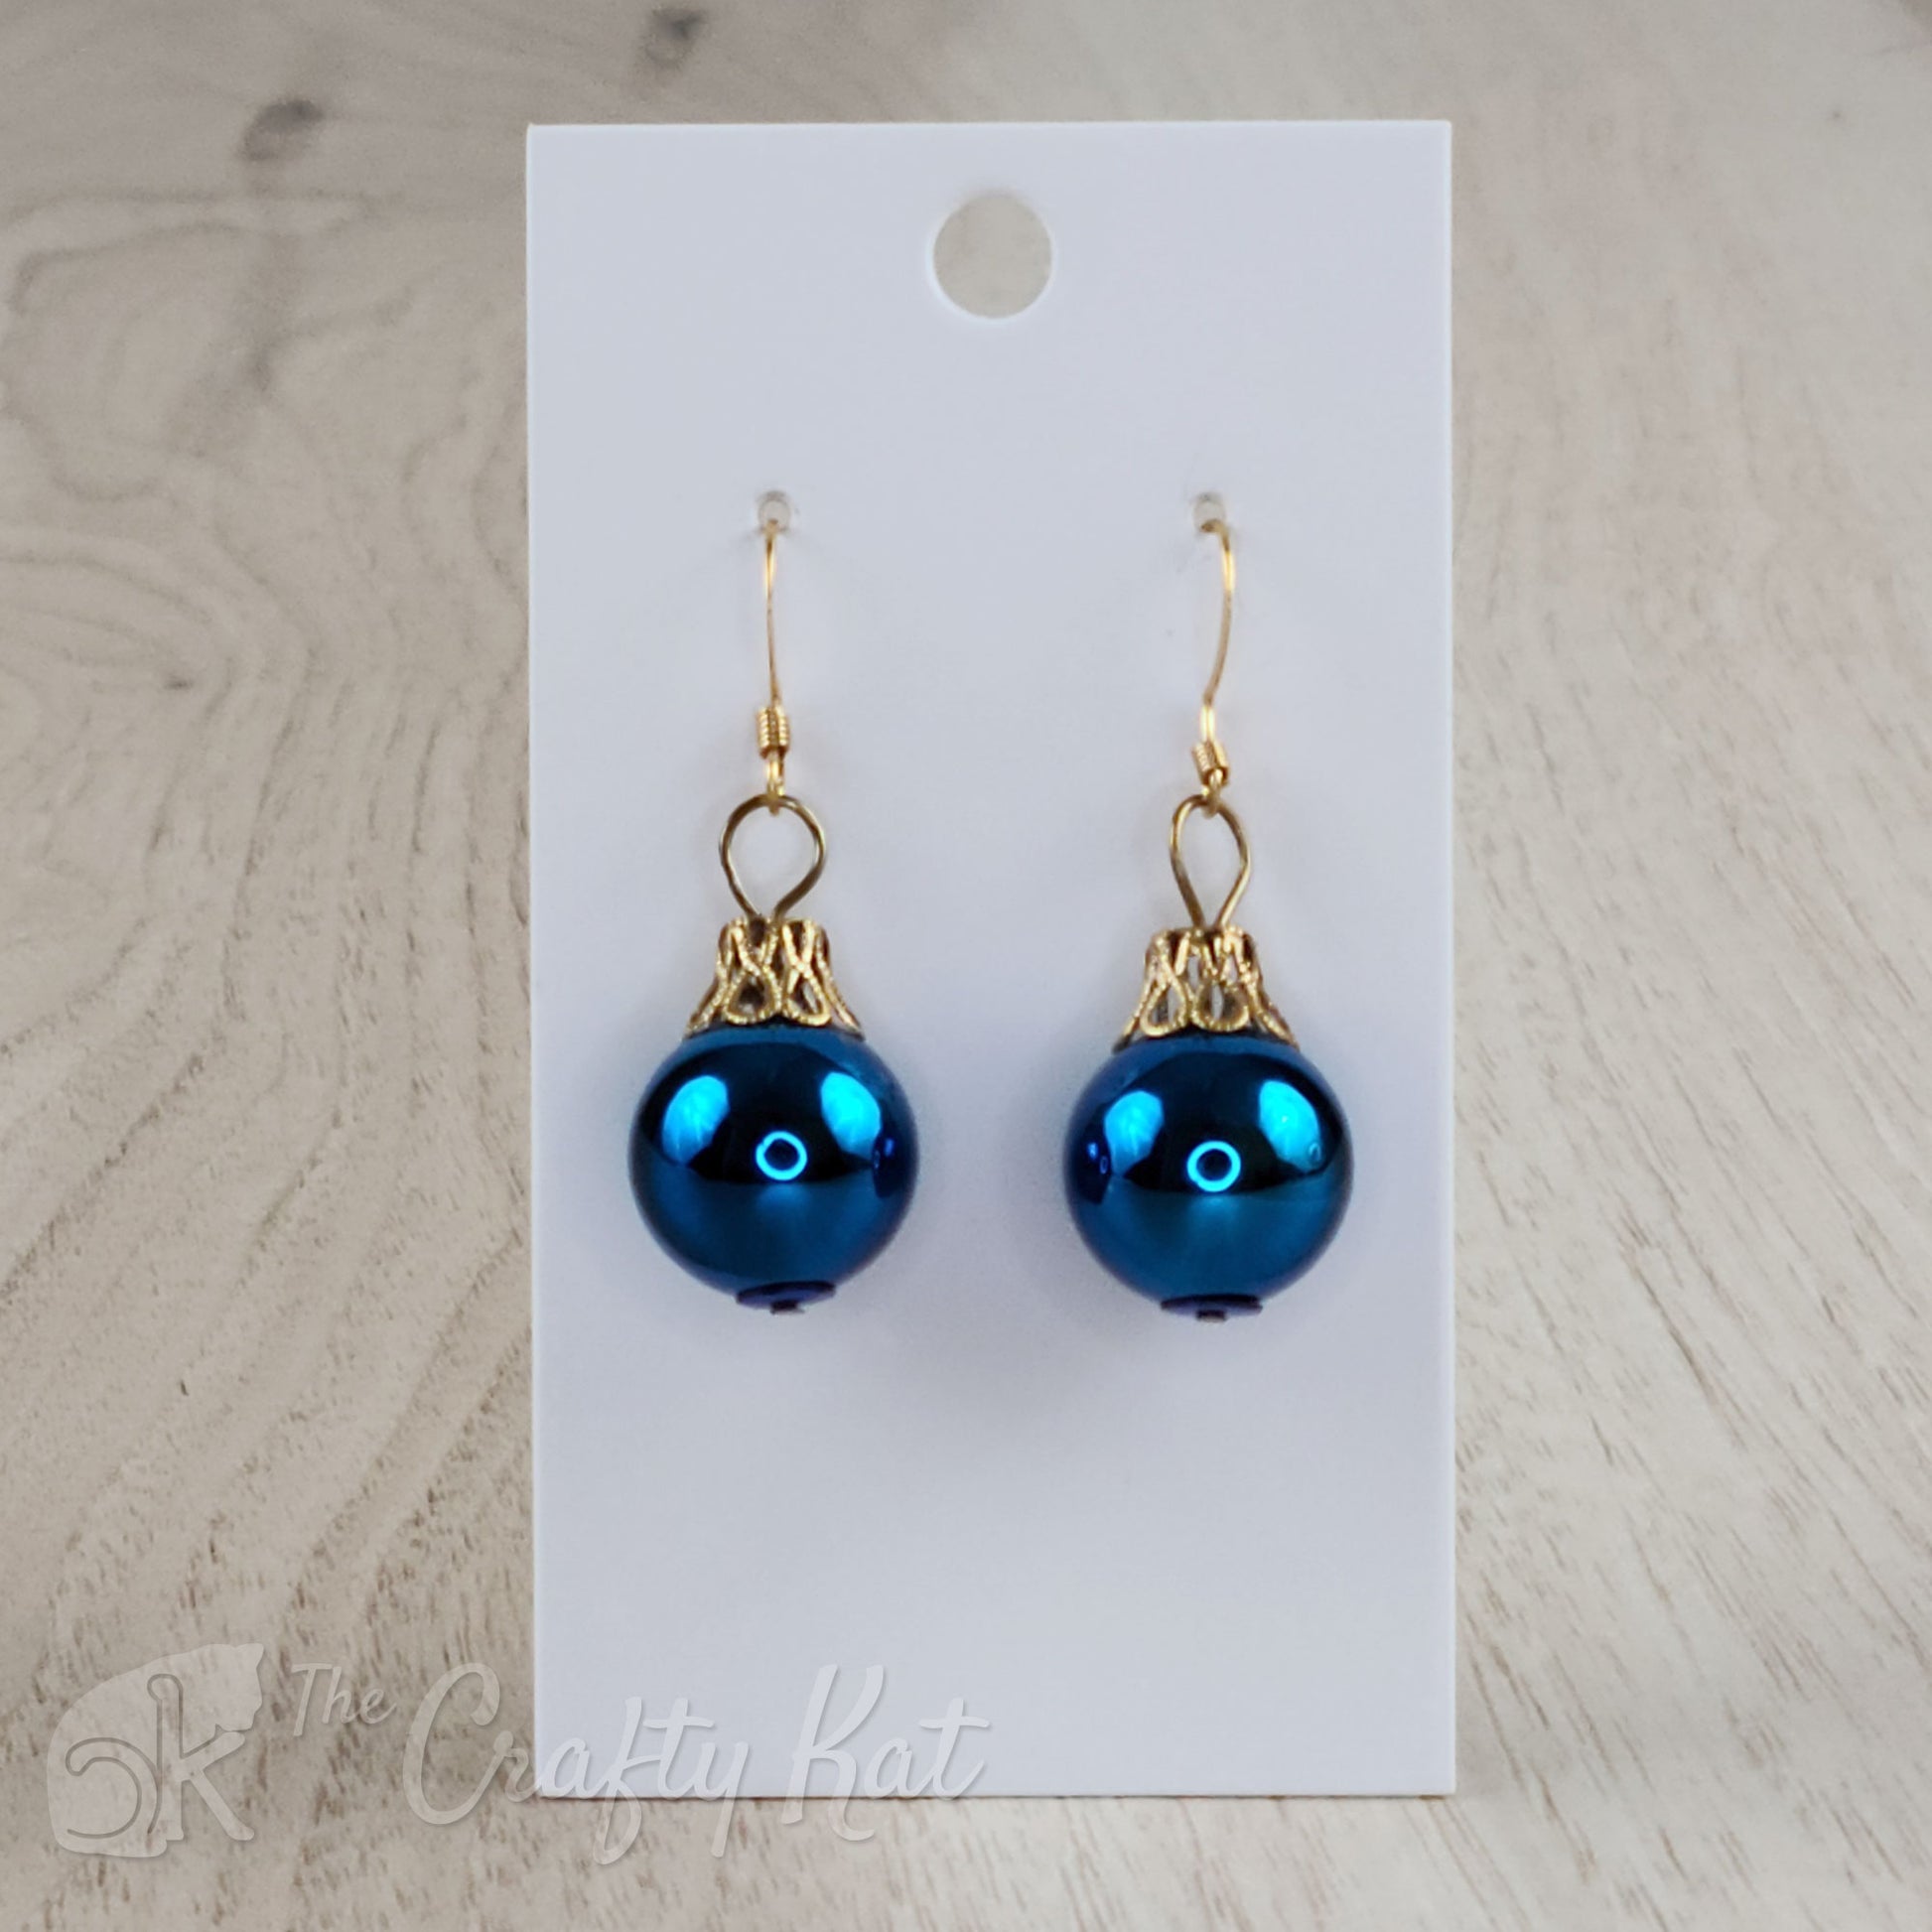 Each earring is a blue globe with a gold-plated filigree cap, giving each the appearance of a classic holiday tree ornament.